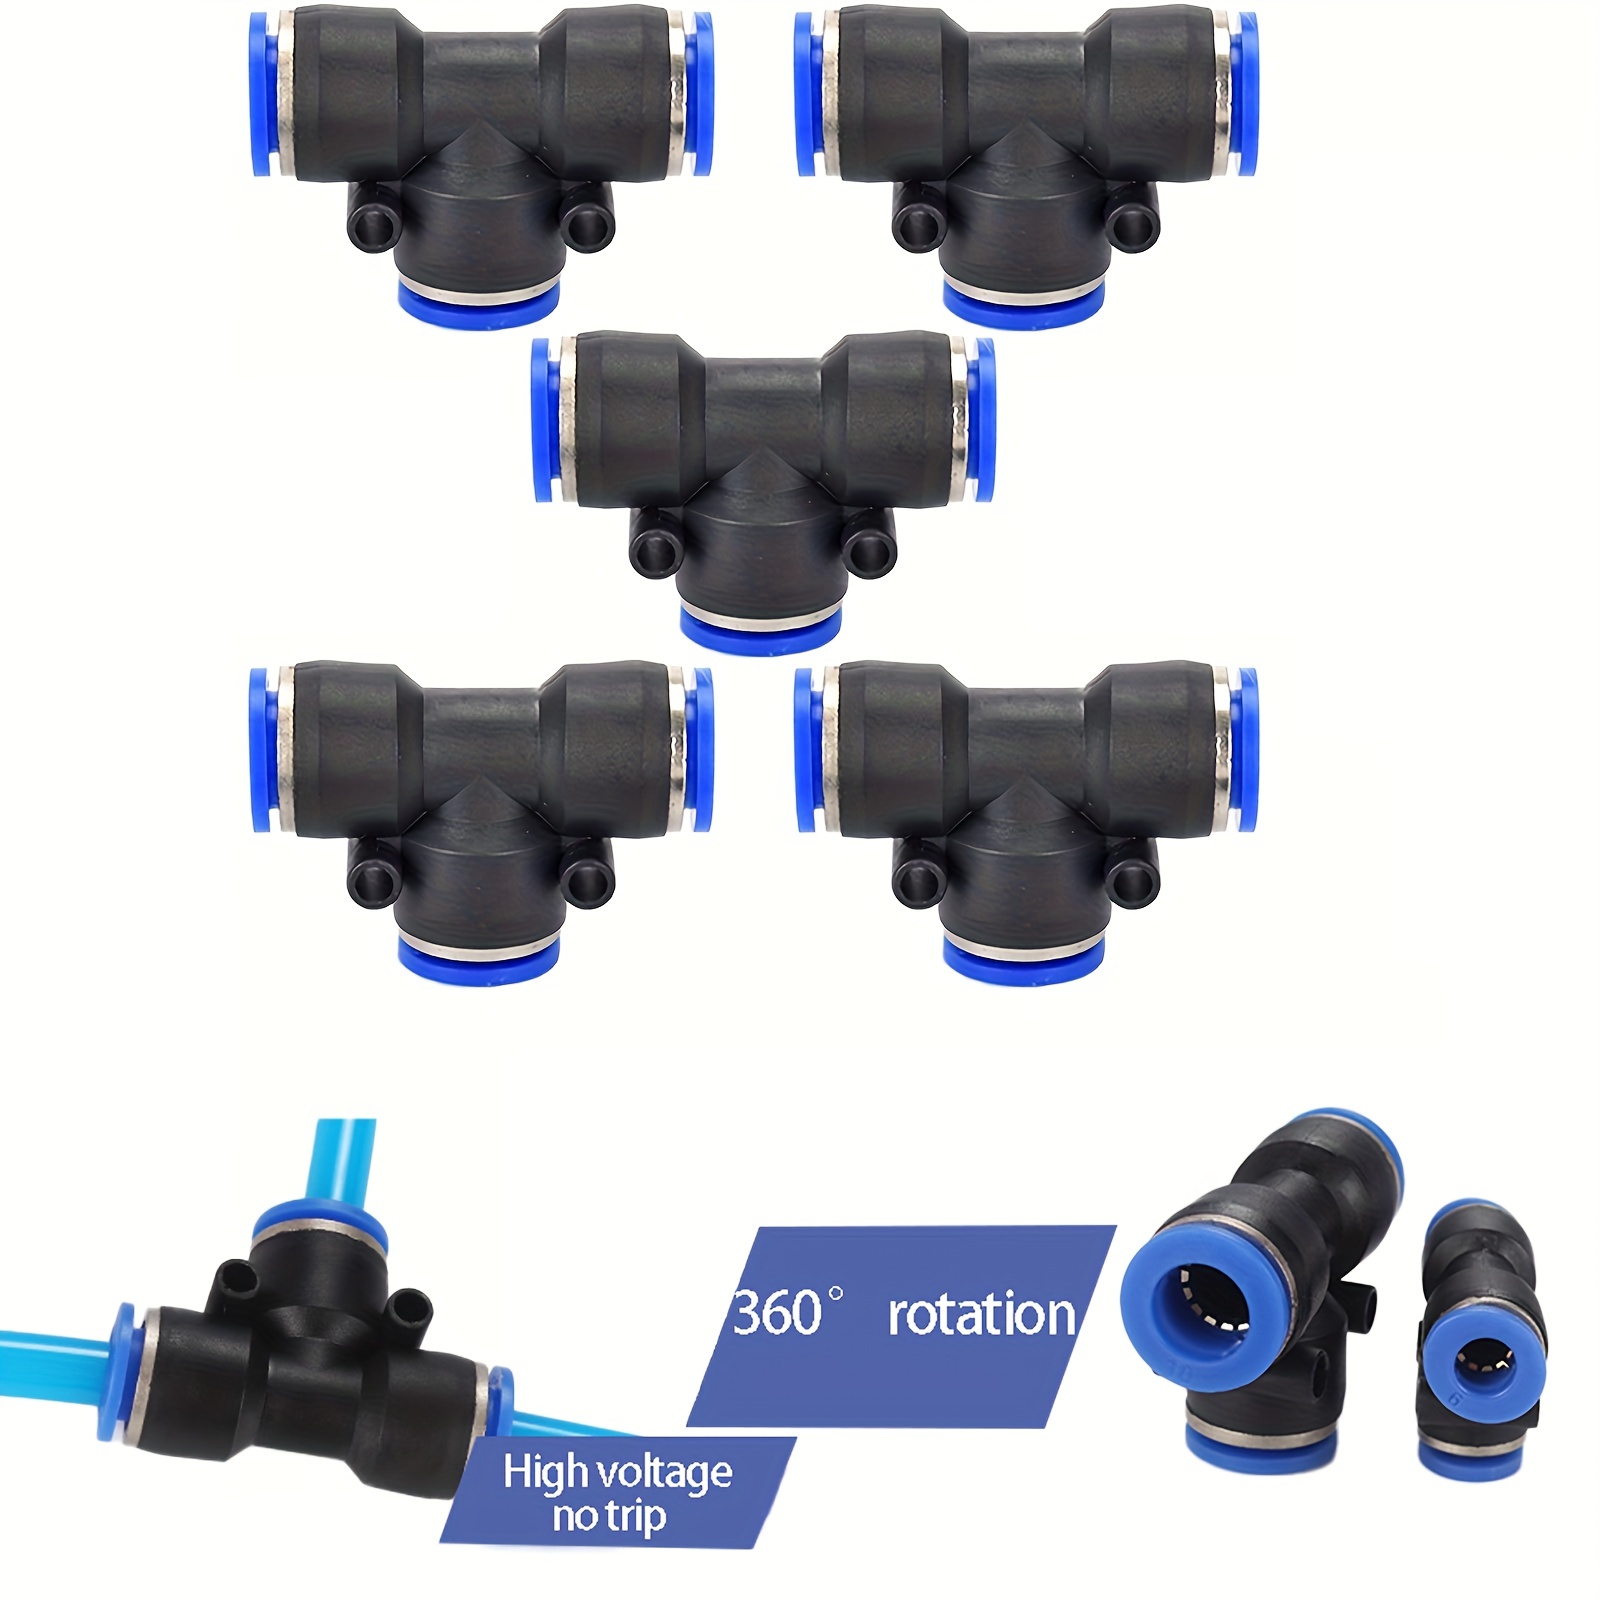 Tee Push to Connect Fittings at